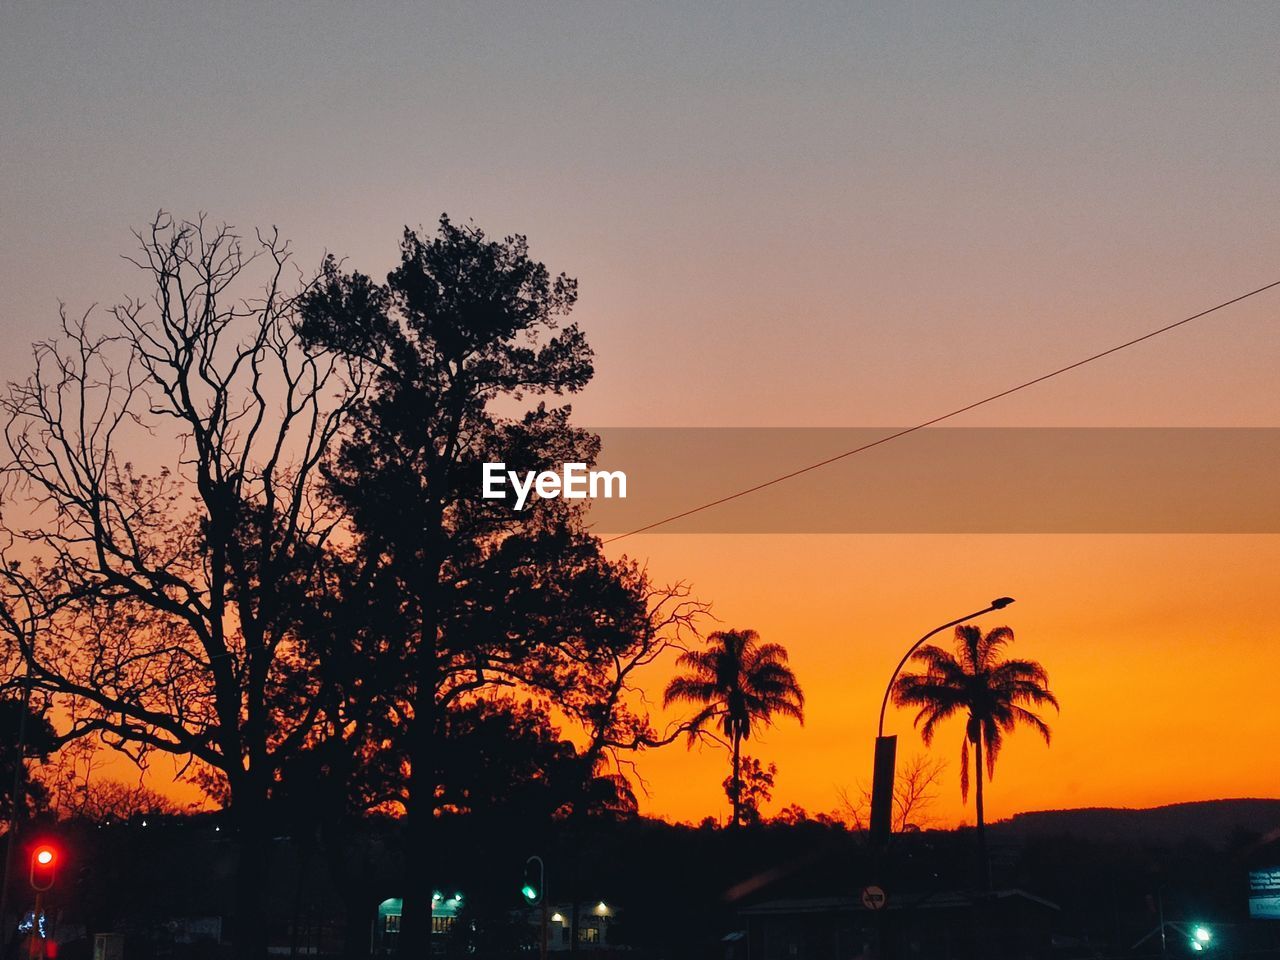 tree, sky, sunset, plant, dusk, evening, orange color, nature, silhouette, afterglow, car, no people, palm tree, beauty in nature, transportation, city, horizon, motor vehicle, mode of transportation, architecture, outdoors, cloud, street, travel destinations, tropical climate, illuminated, scenics - nature, tranquility, road, sun, travel